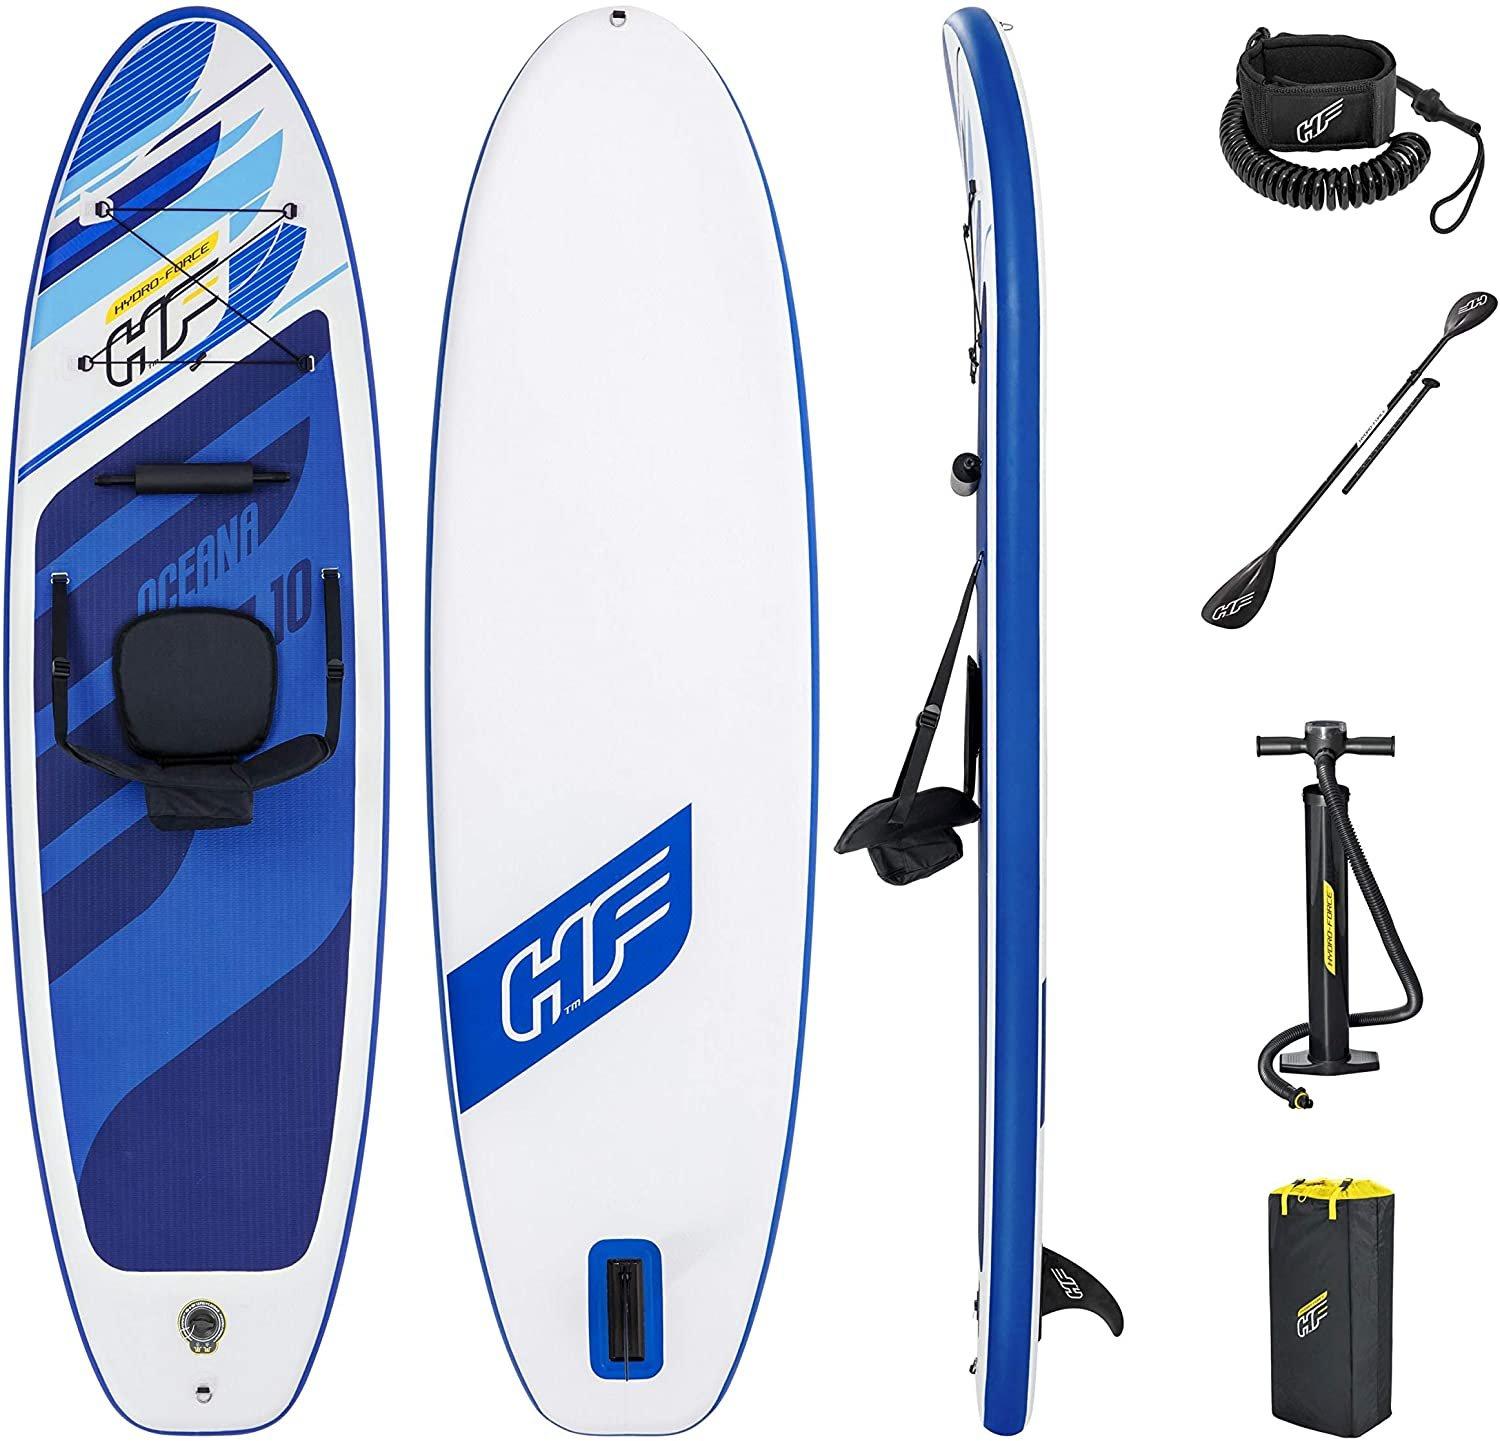 Hydroforce Oceana Sup Paddleboard With Seat